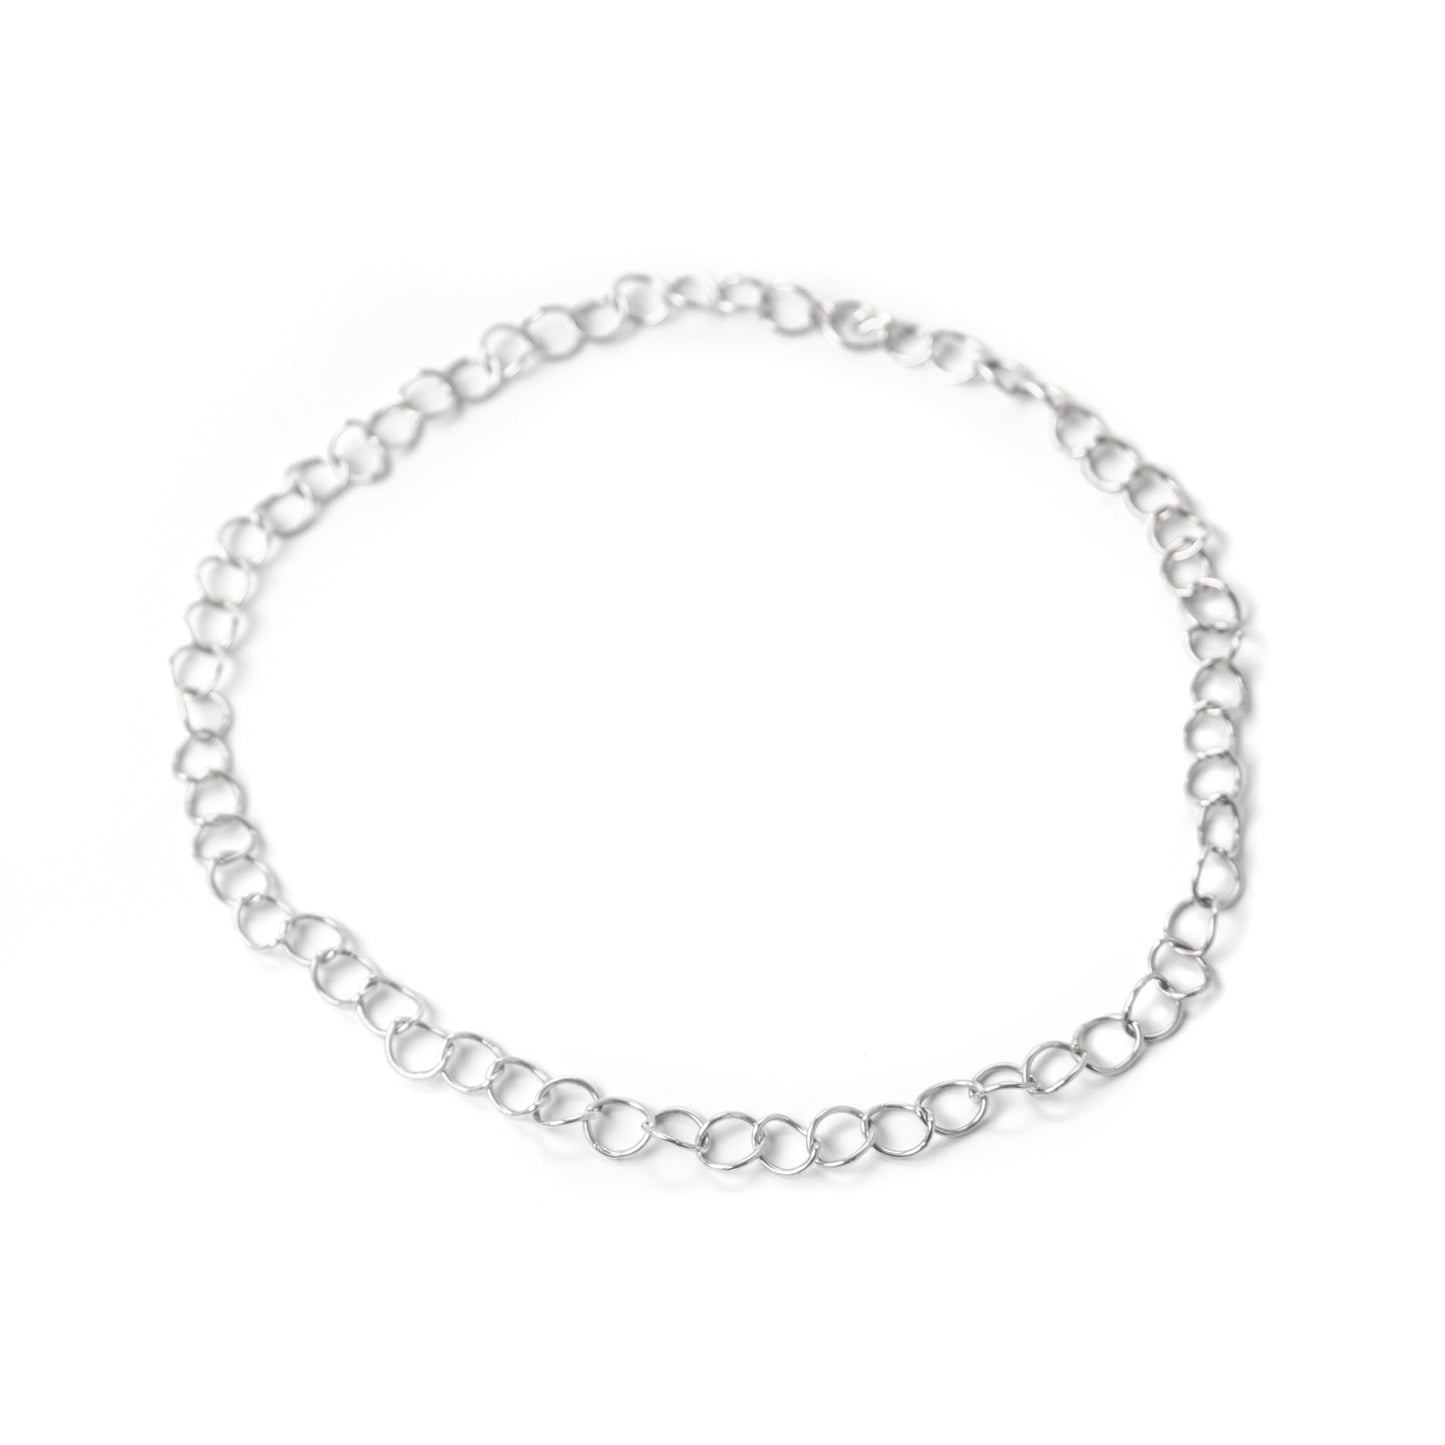 Sliver Loop chain by Katy Luxton Jewellery